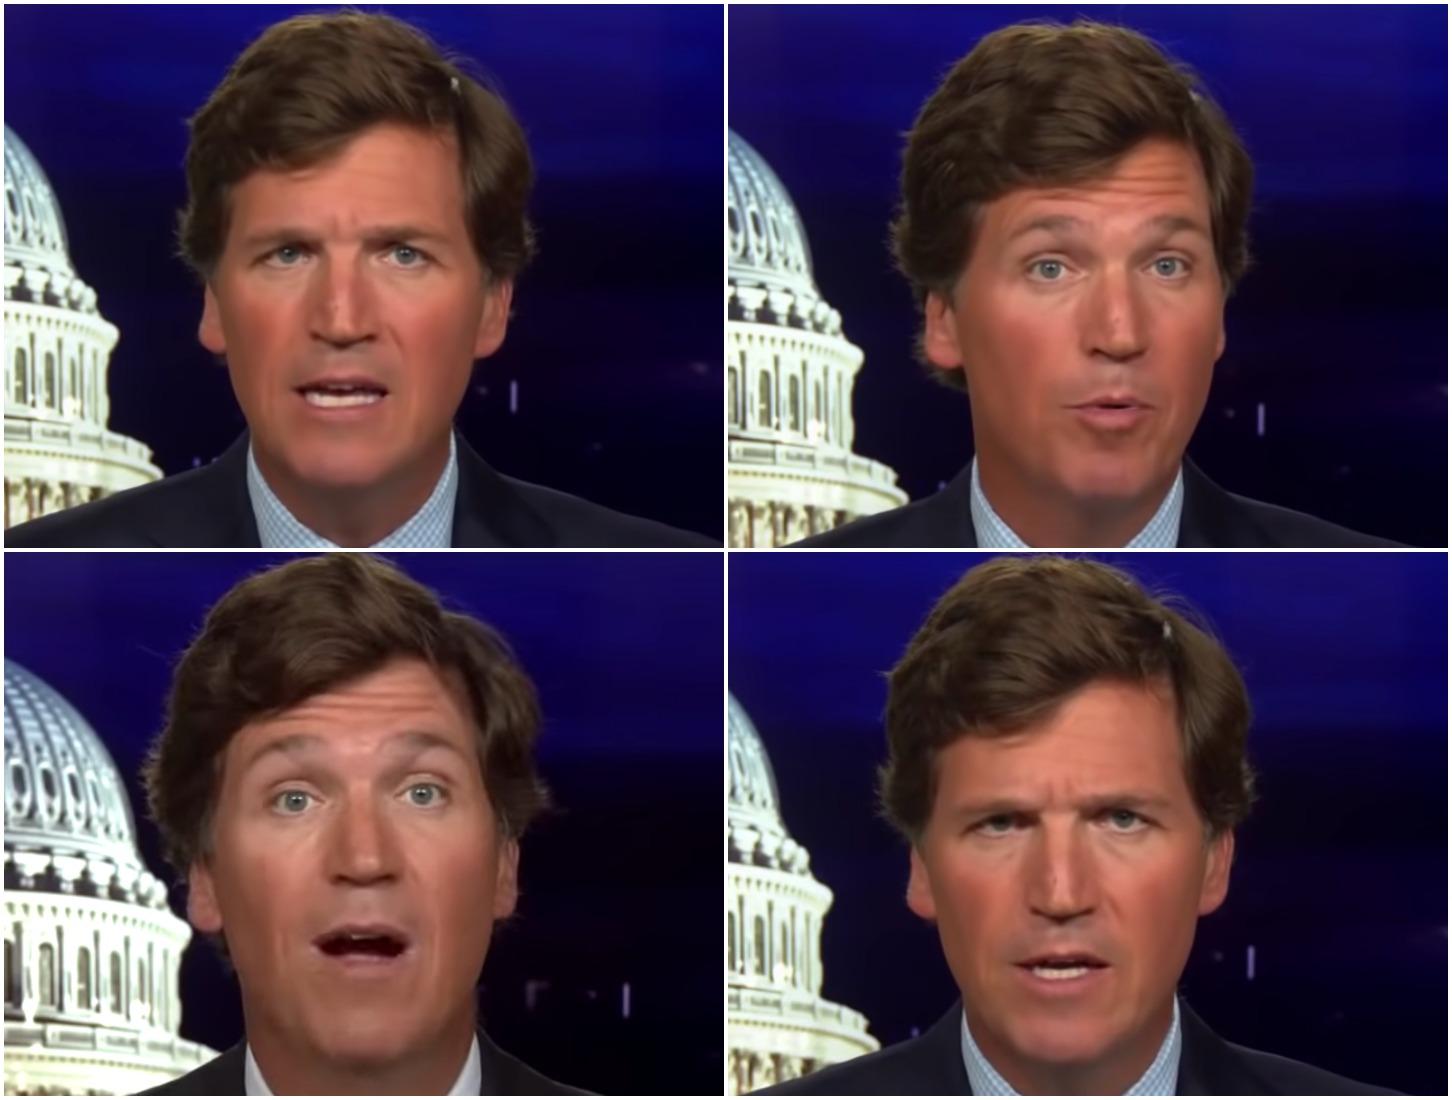 If eyes are windows to the soul, Tucker Carlson’s is black and white